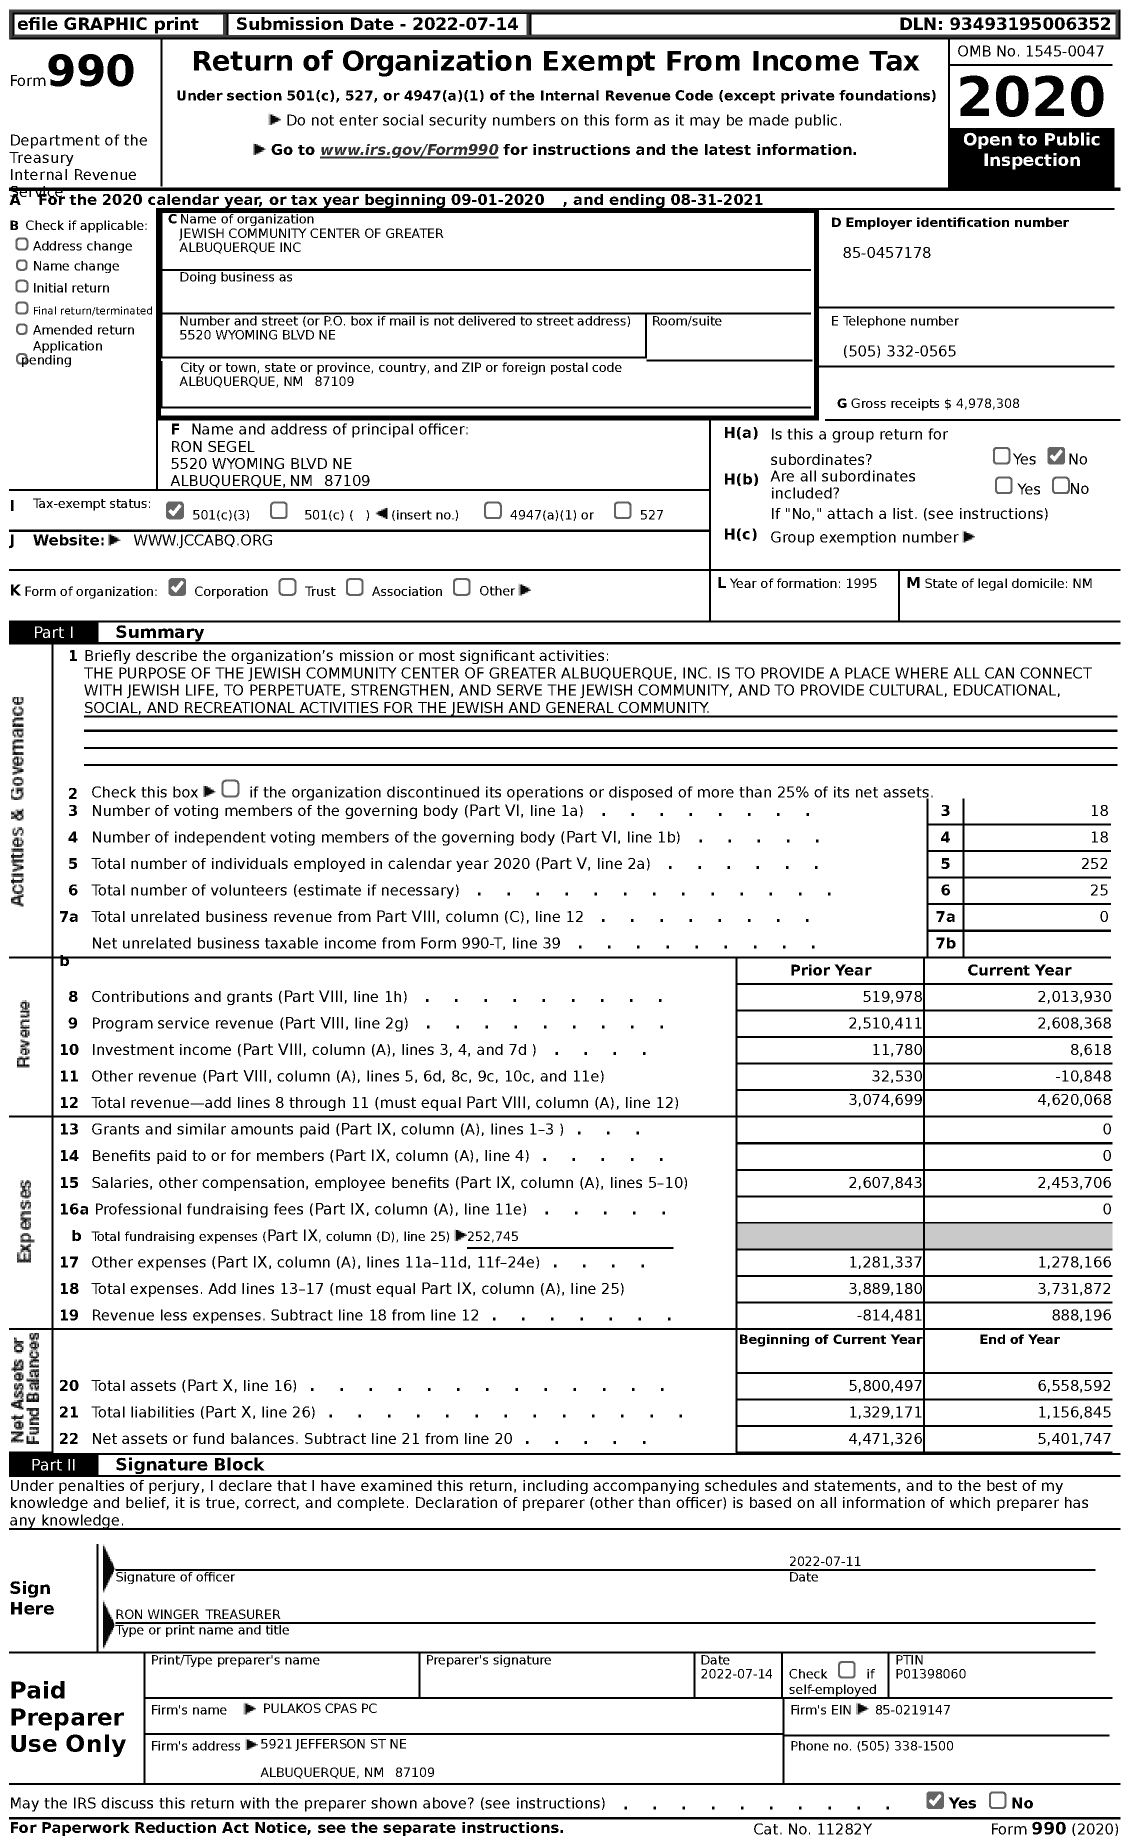 Image of first page of 2020 Form 990 for Jewish Community Center of Greater Albuquerque (JCC)